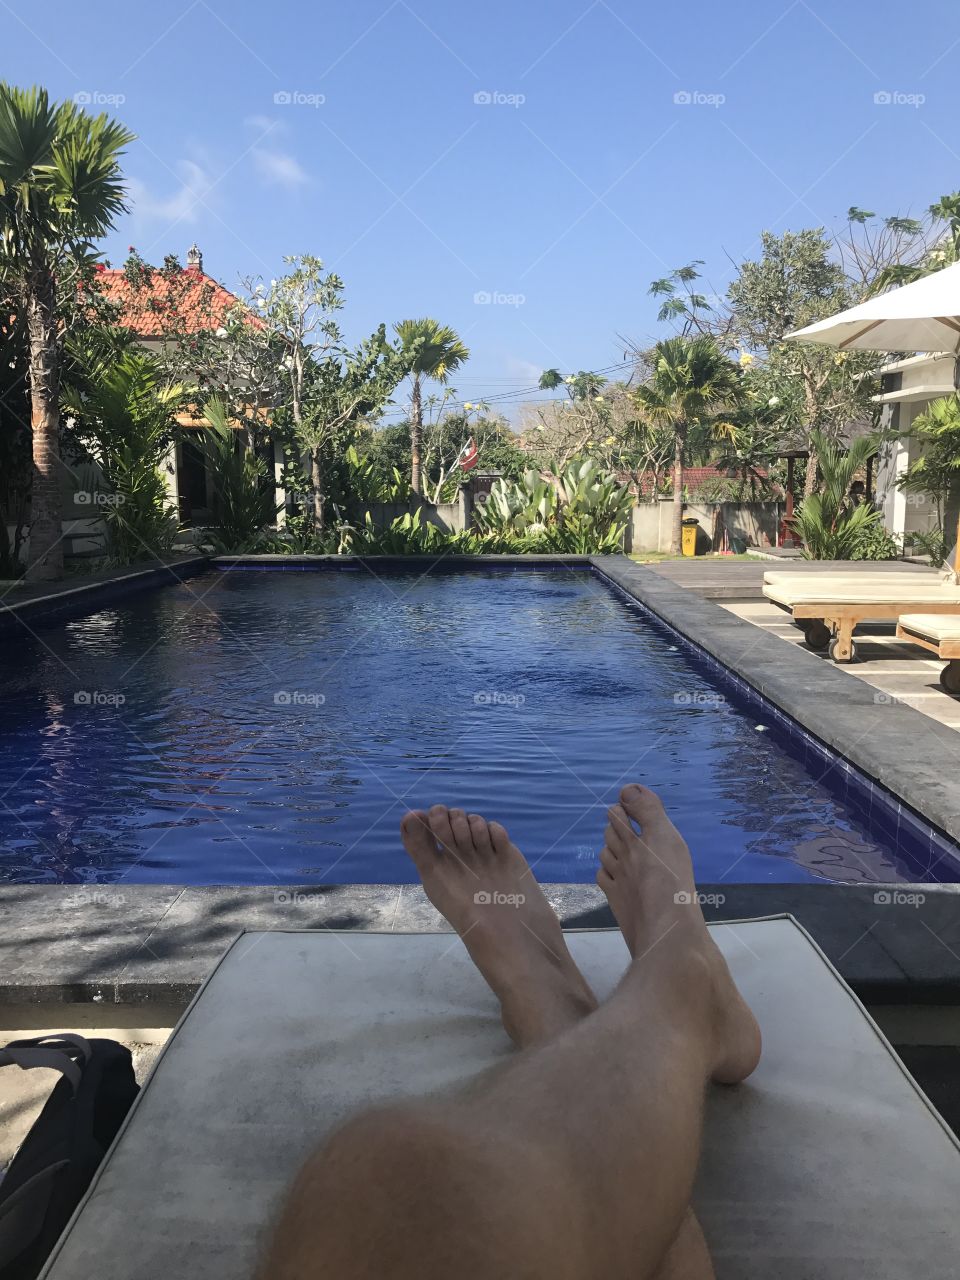 Chilling at the swimming pool in Bali